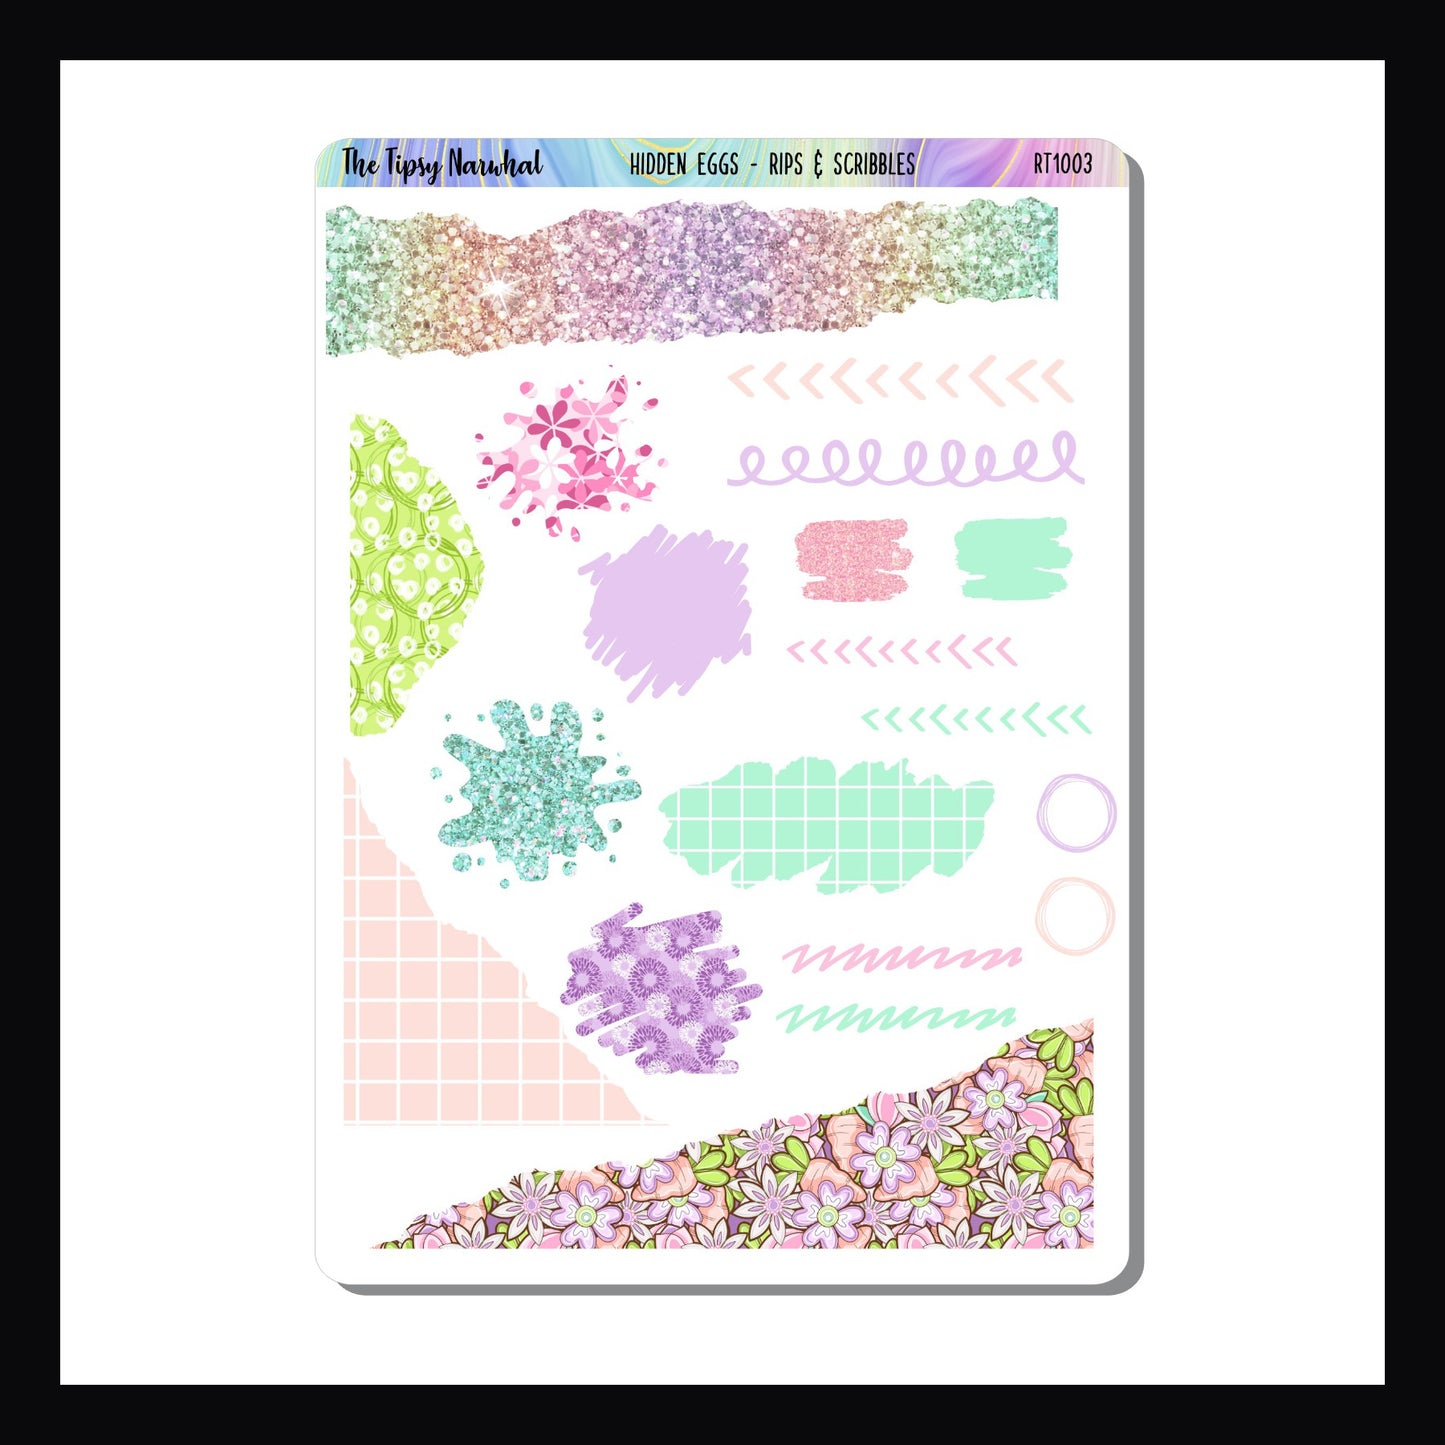 Hidden Eggs Vertical Kit - Rips and Scribbles Add-on.  The Rips & Scribbles Sheet features several abstract stickers featuring scribble like sketches or torn paper appearances.